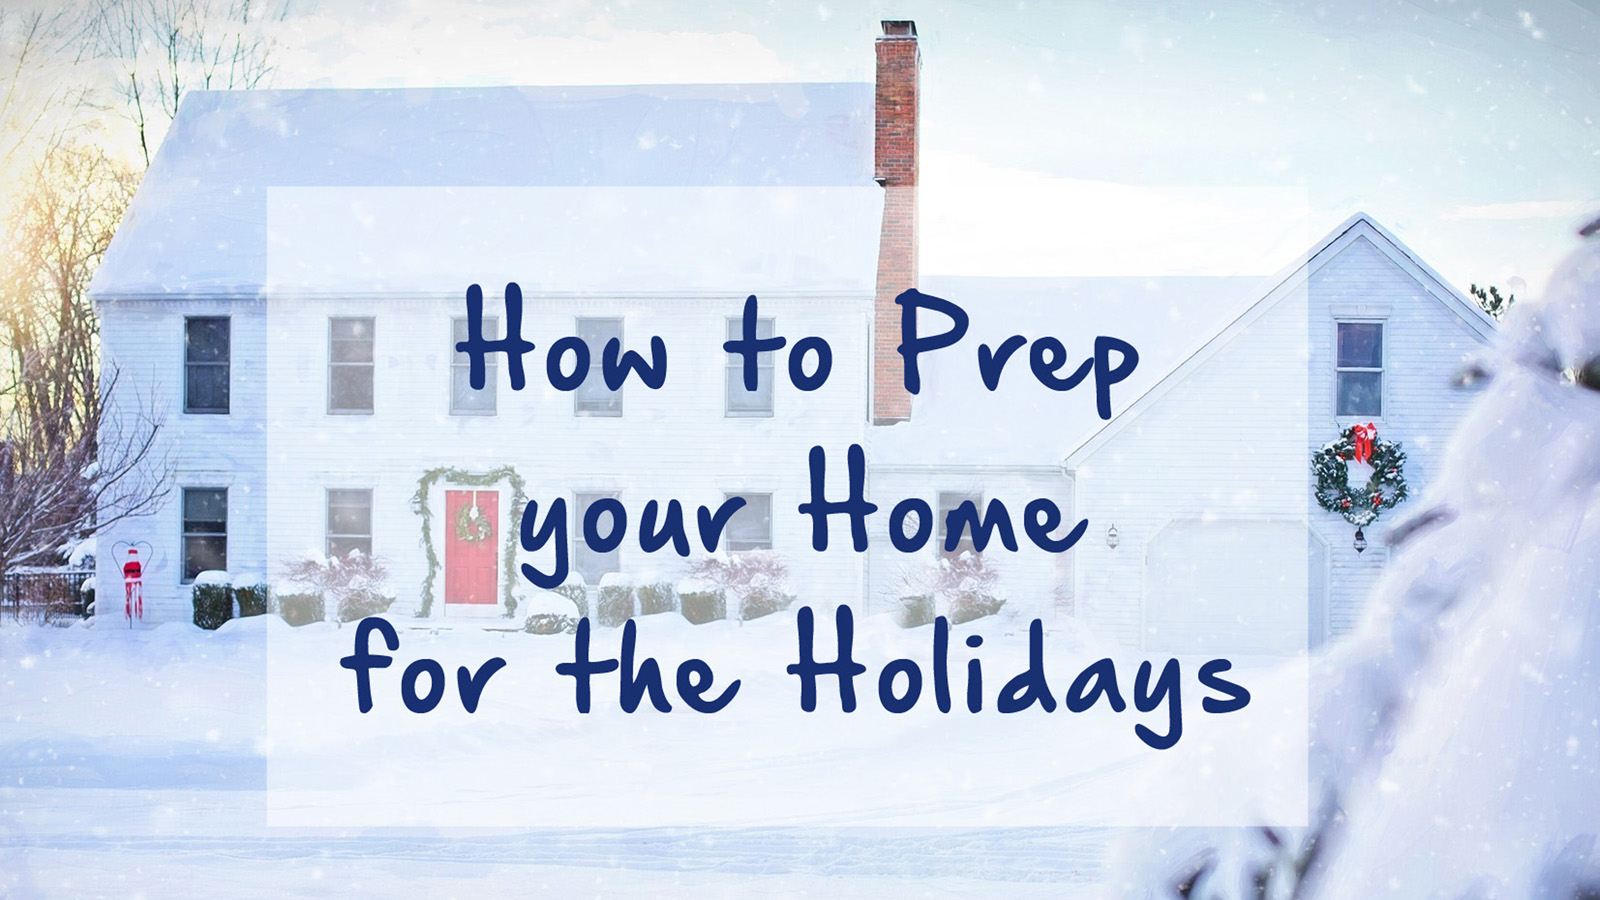 How to Prep your Home for the Holidays